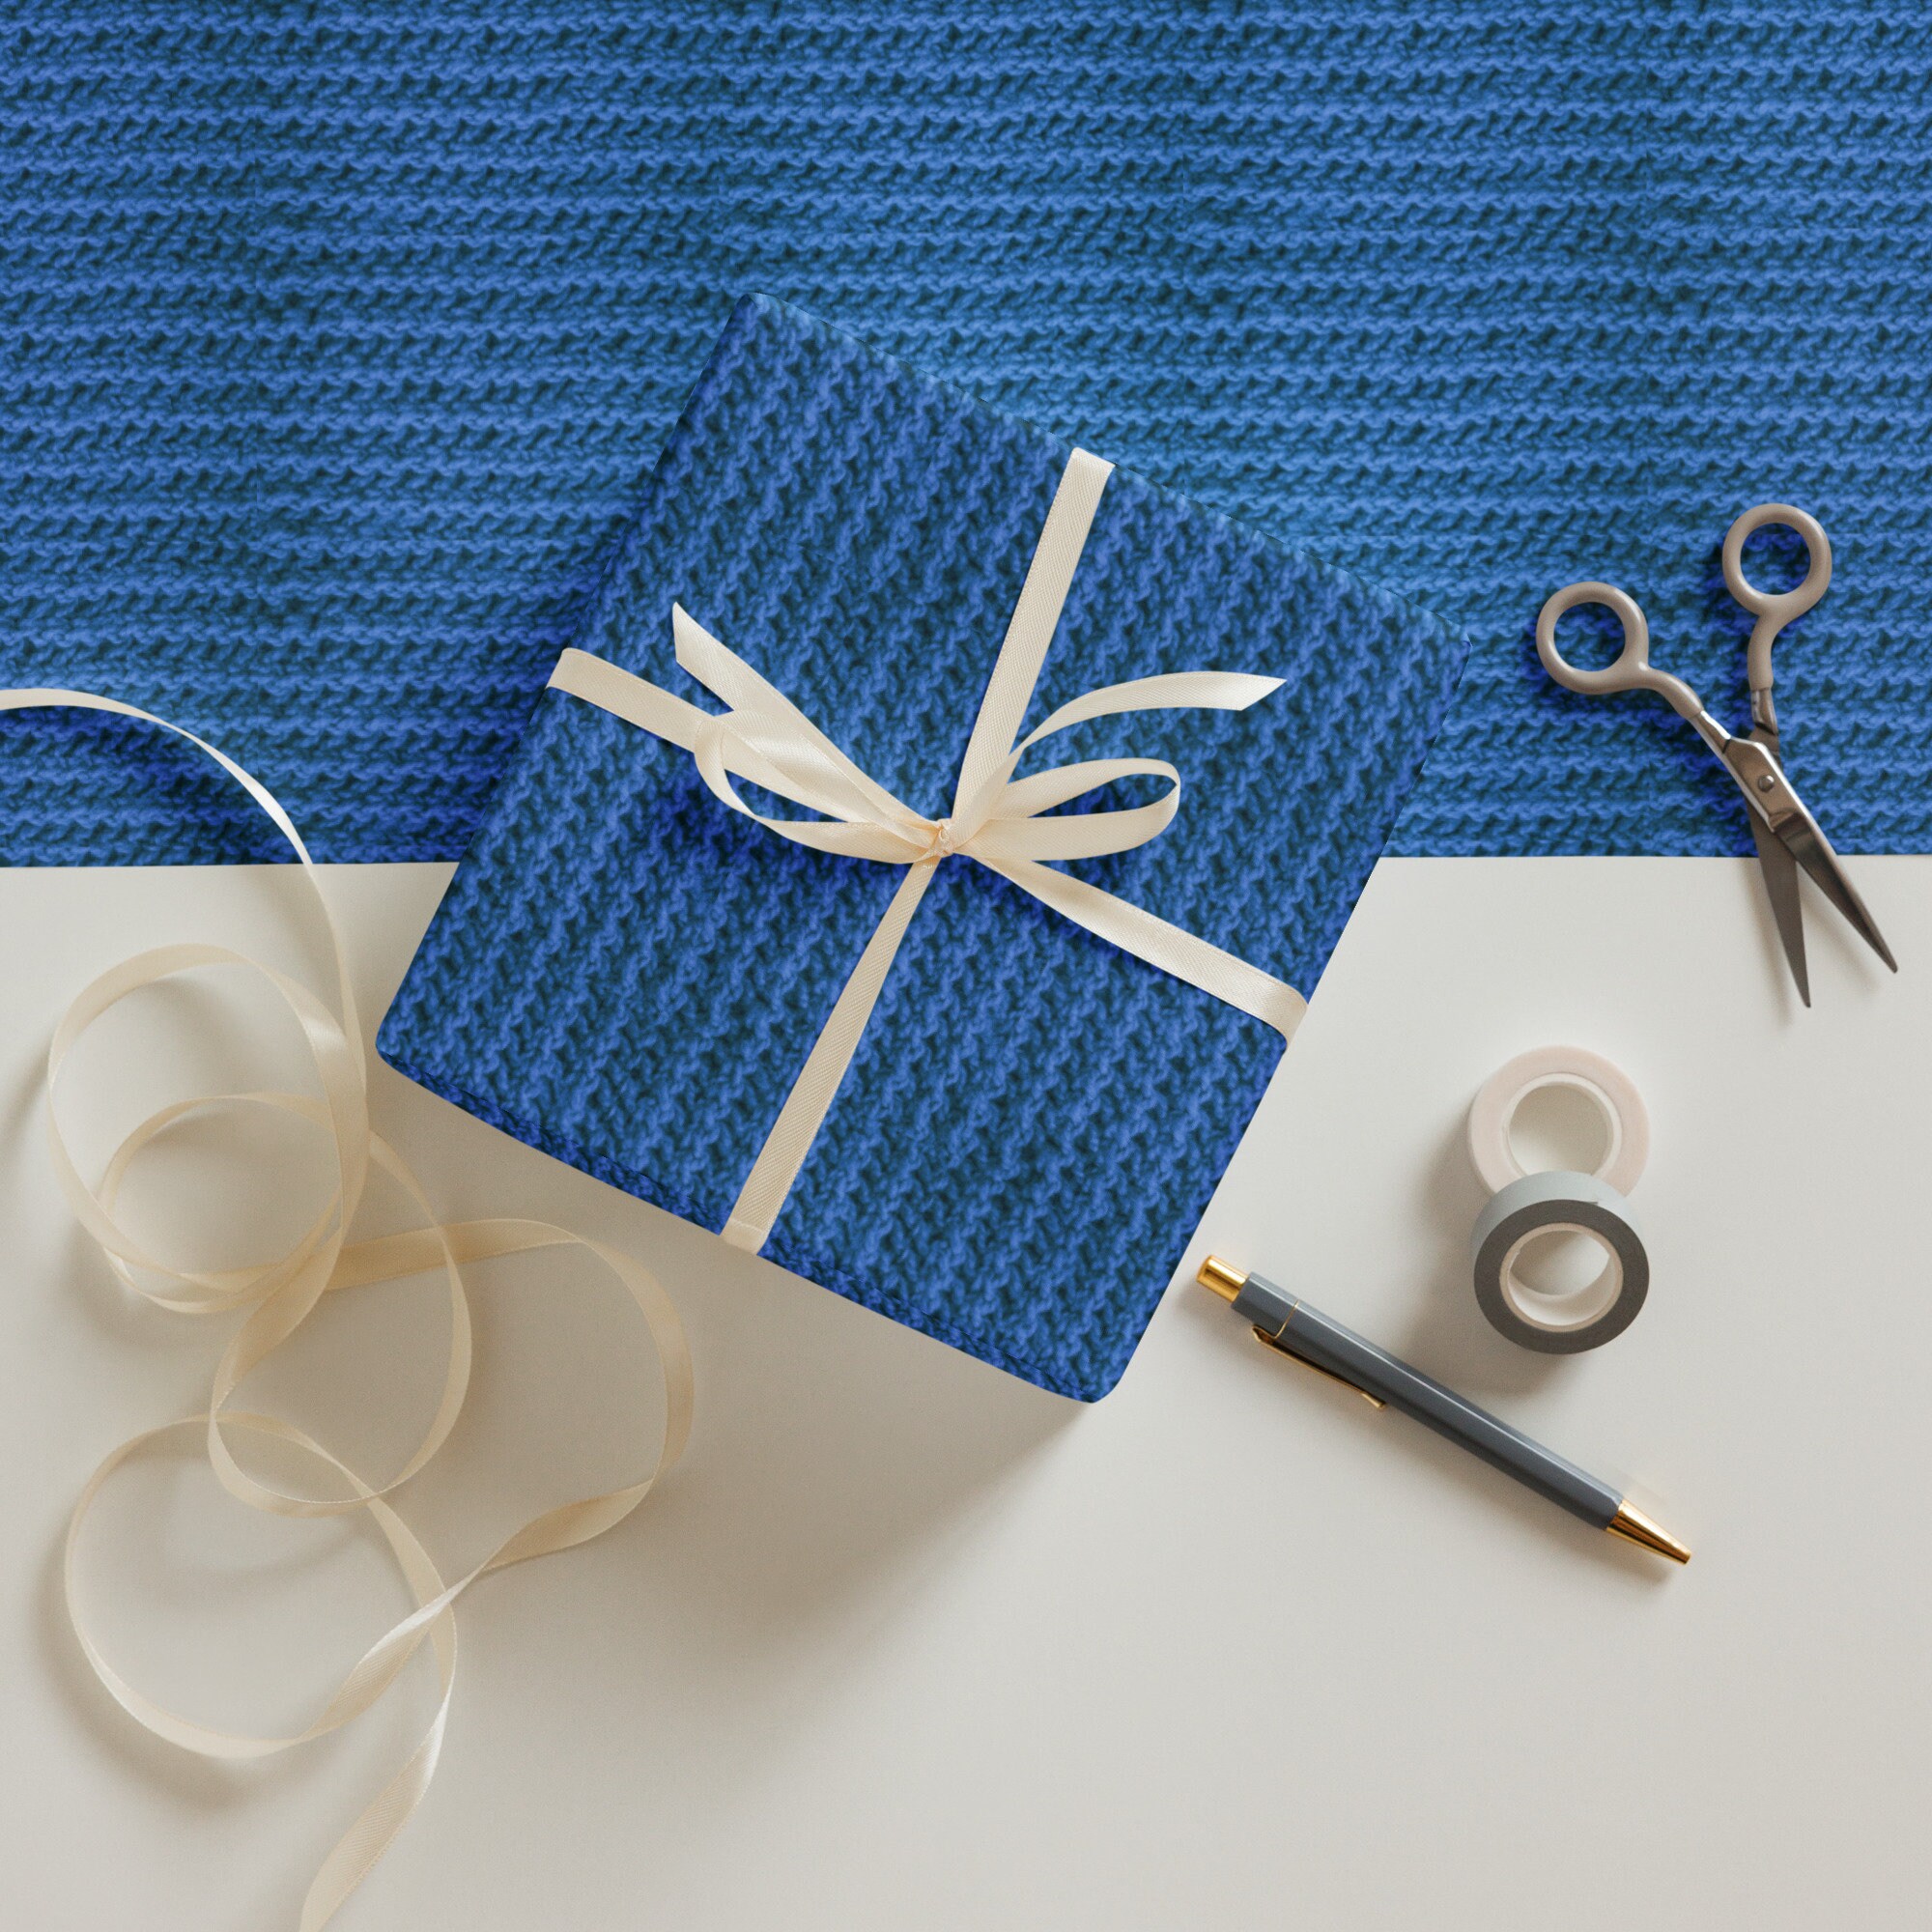 Christmas Pattern Knitted Stitch Dark Blue Wrapping Paper by dejavu69